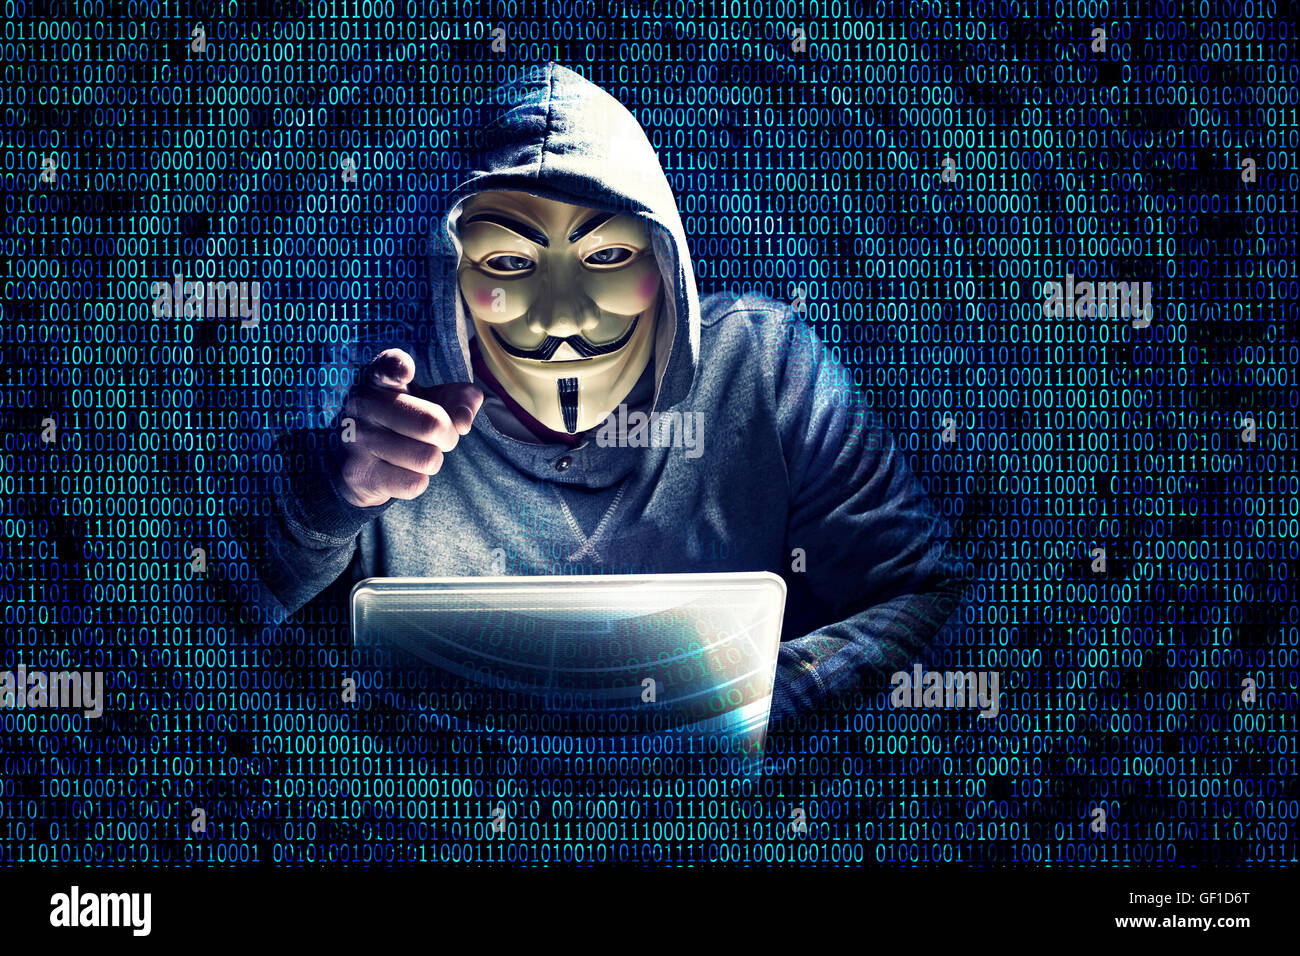 portrait of hacker with mask and binary code background Stock Photo